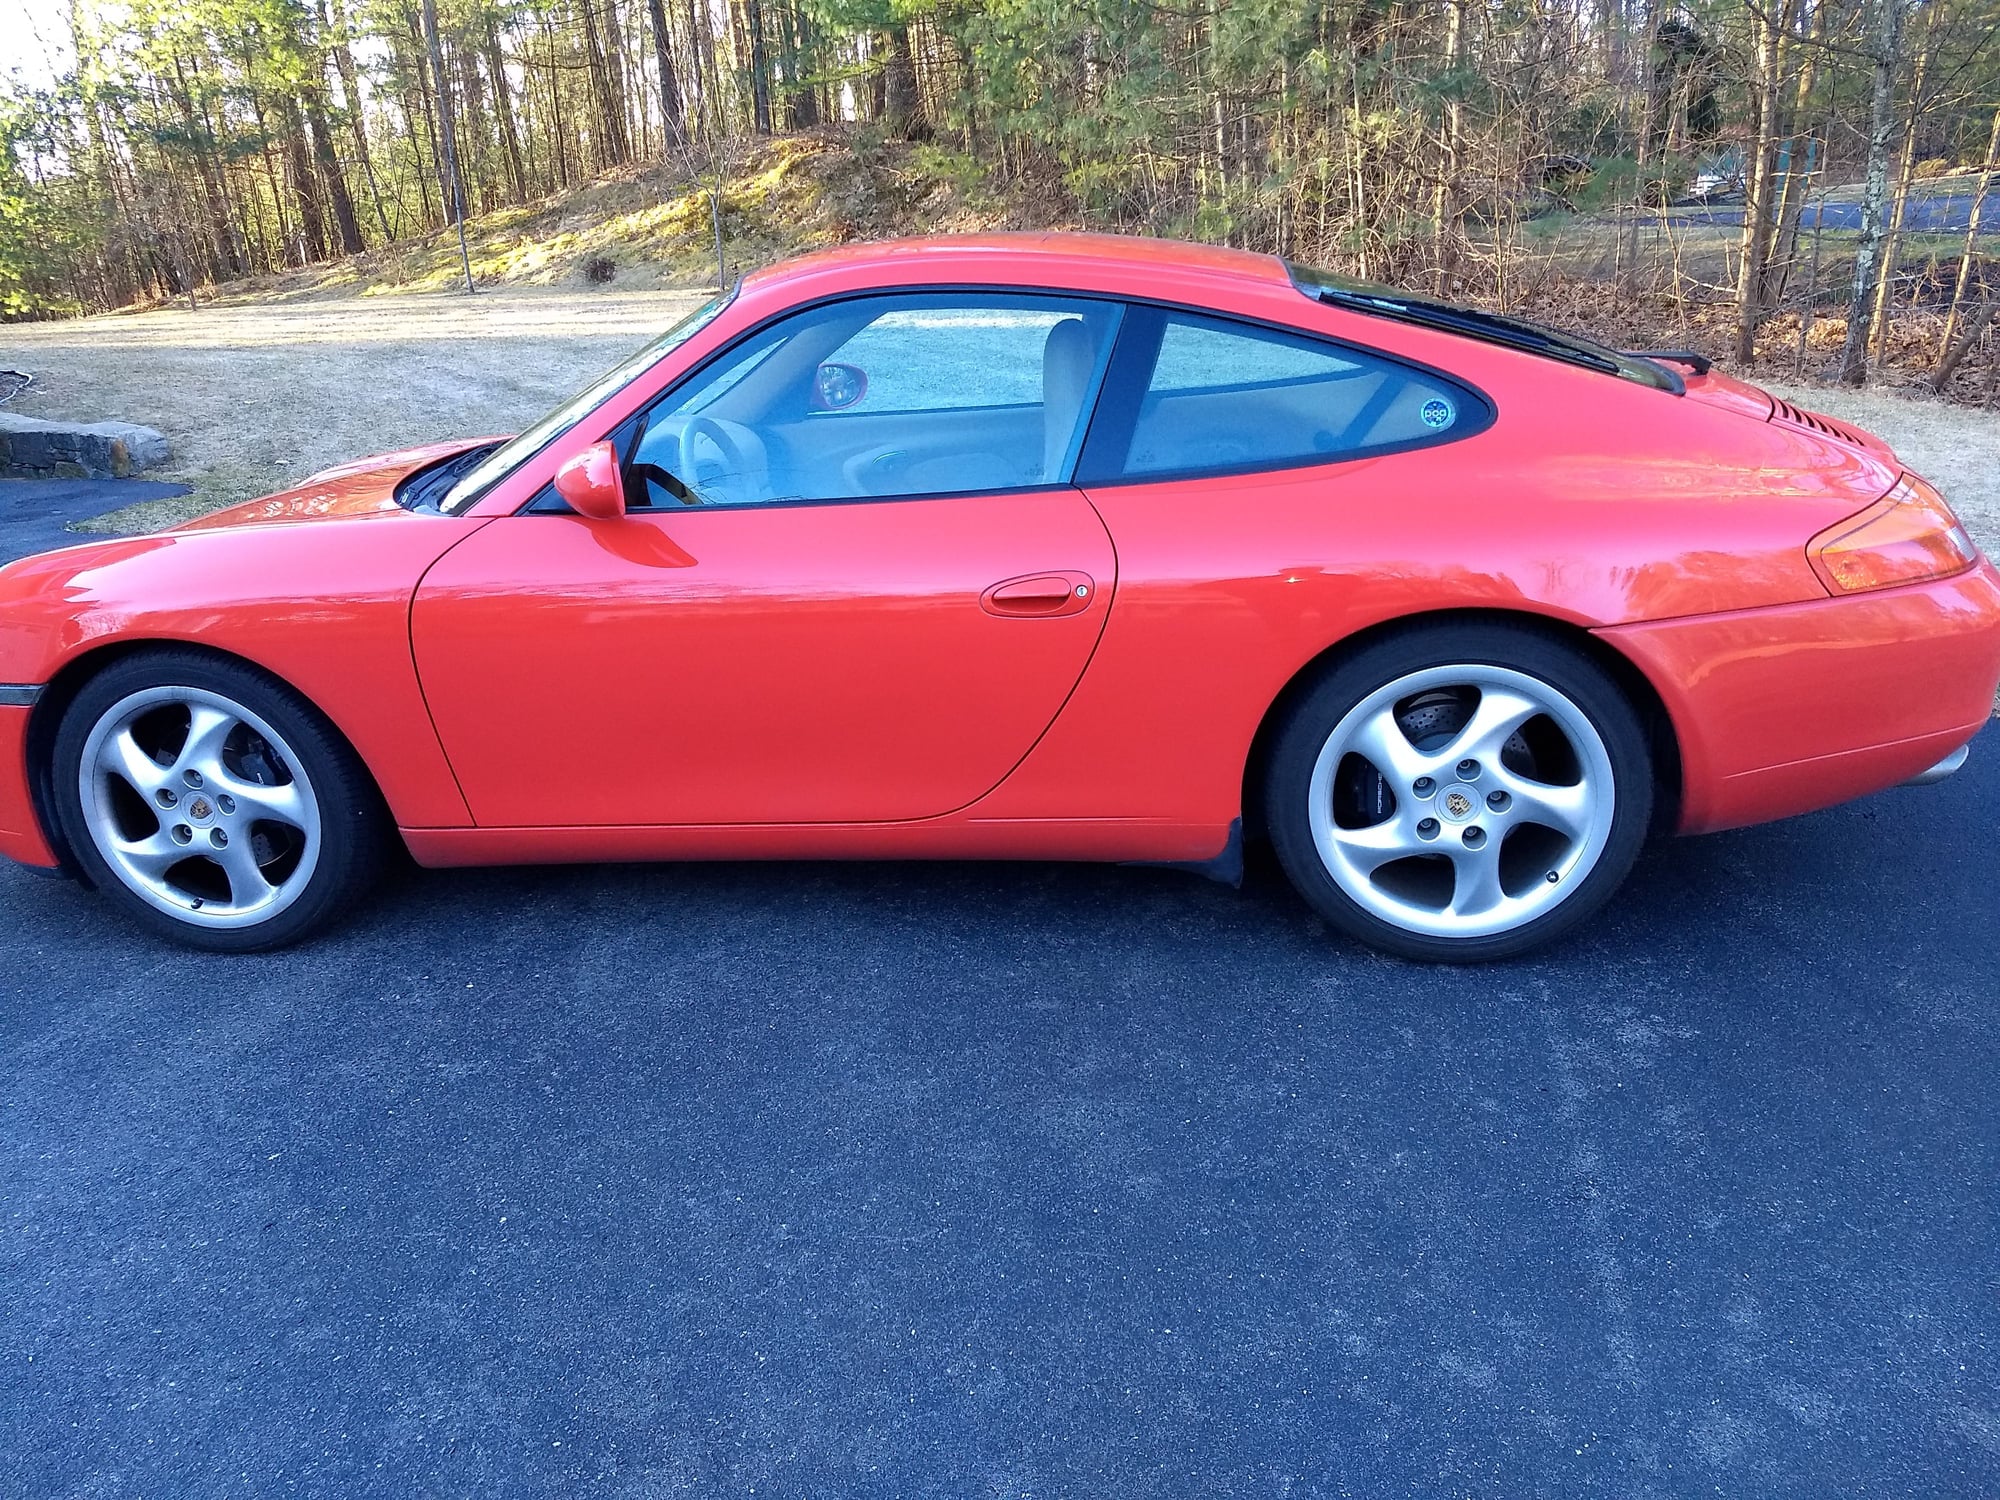 1999 Porsche 911 - All original, early build 996, great condition - Used - VIN wpoaa2995xs620565 - 88,000 Miles - 6 cyl - 2WD - Manual - Coupe - Red - North Andover, MA 01845, United States